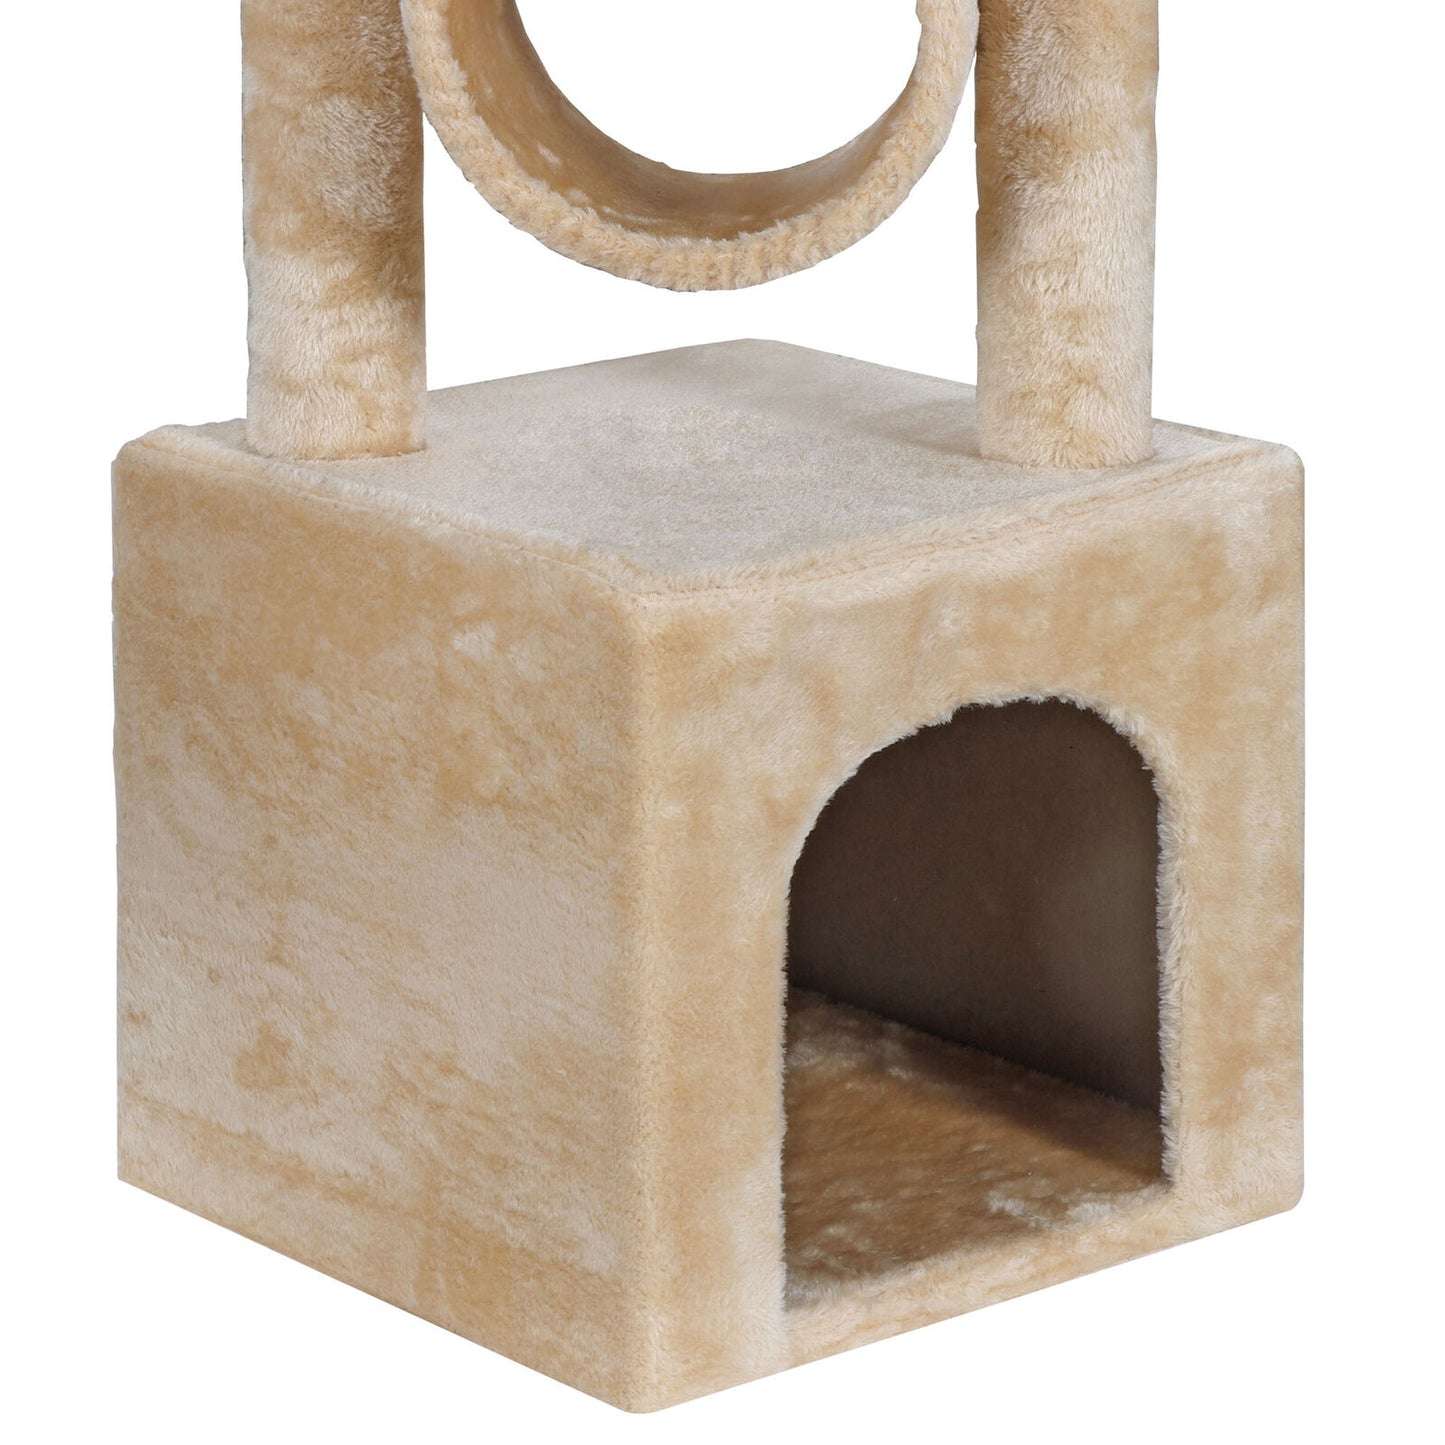 ACTIVITY CAT TREE TOWERS PET HOUSE CAVE WITH SCRACHING POSTS CLIMBING LADDER